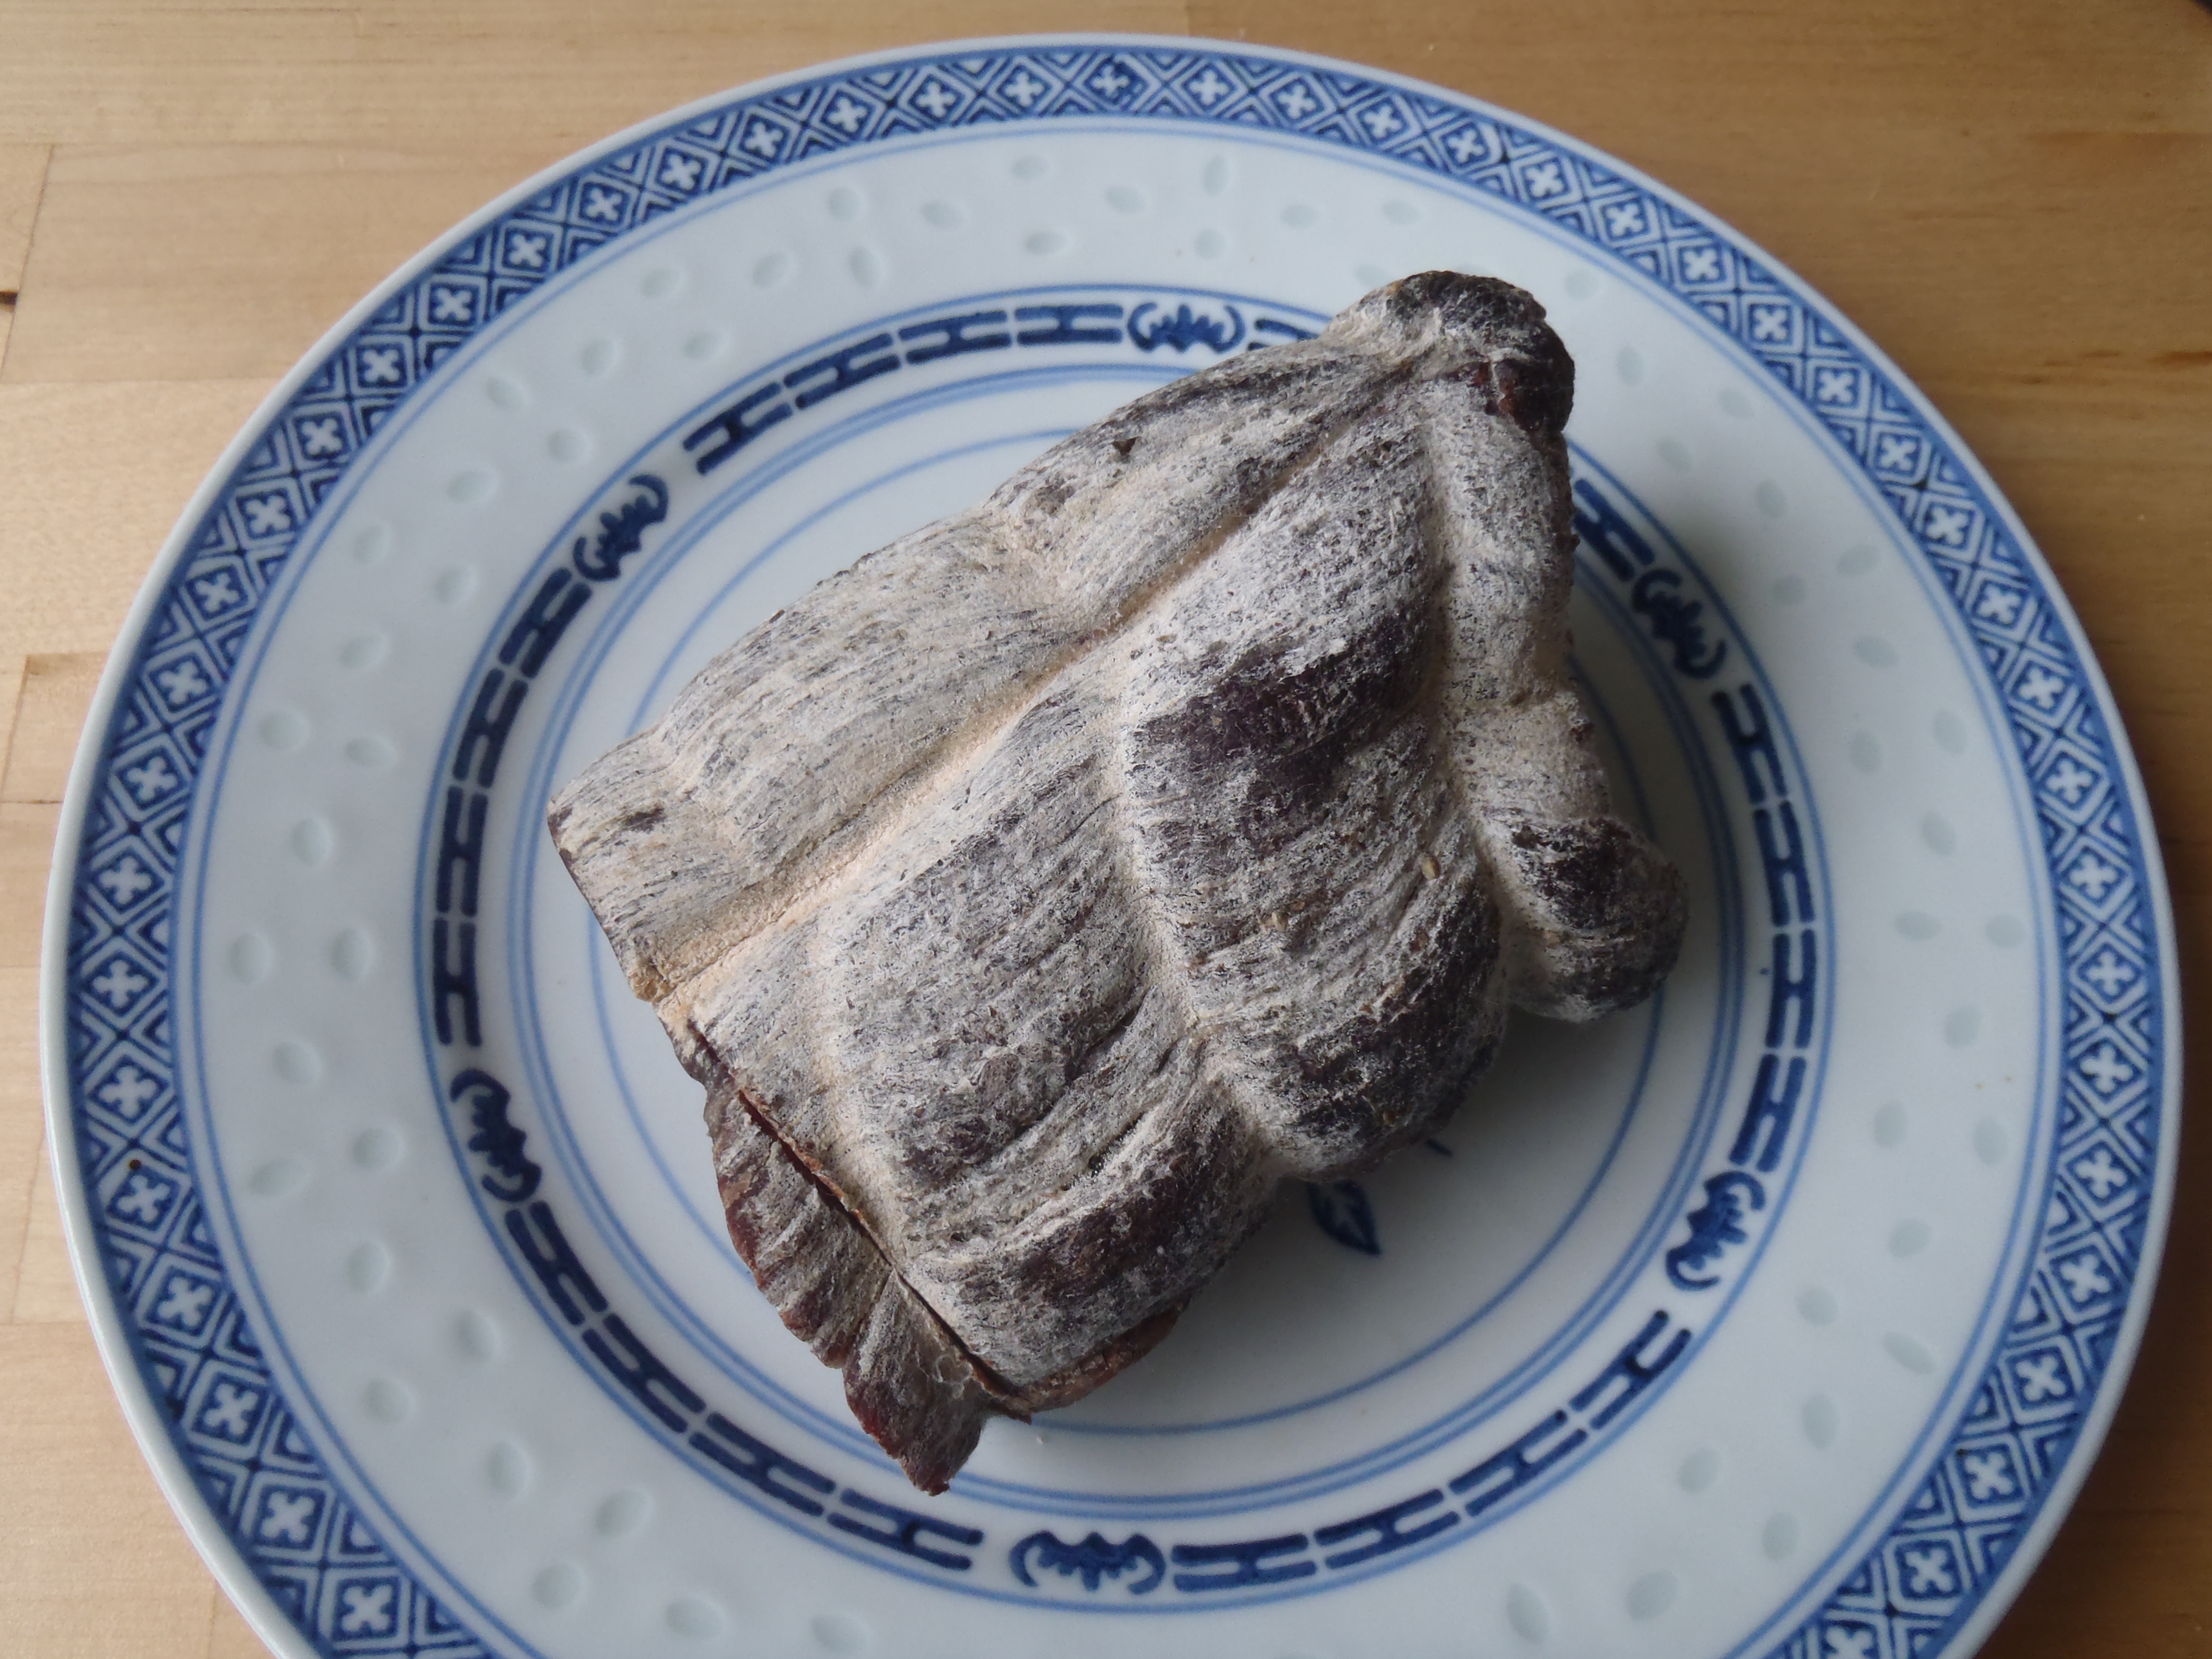 A chunk of air-dried beef, or bresaola, from the cellar